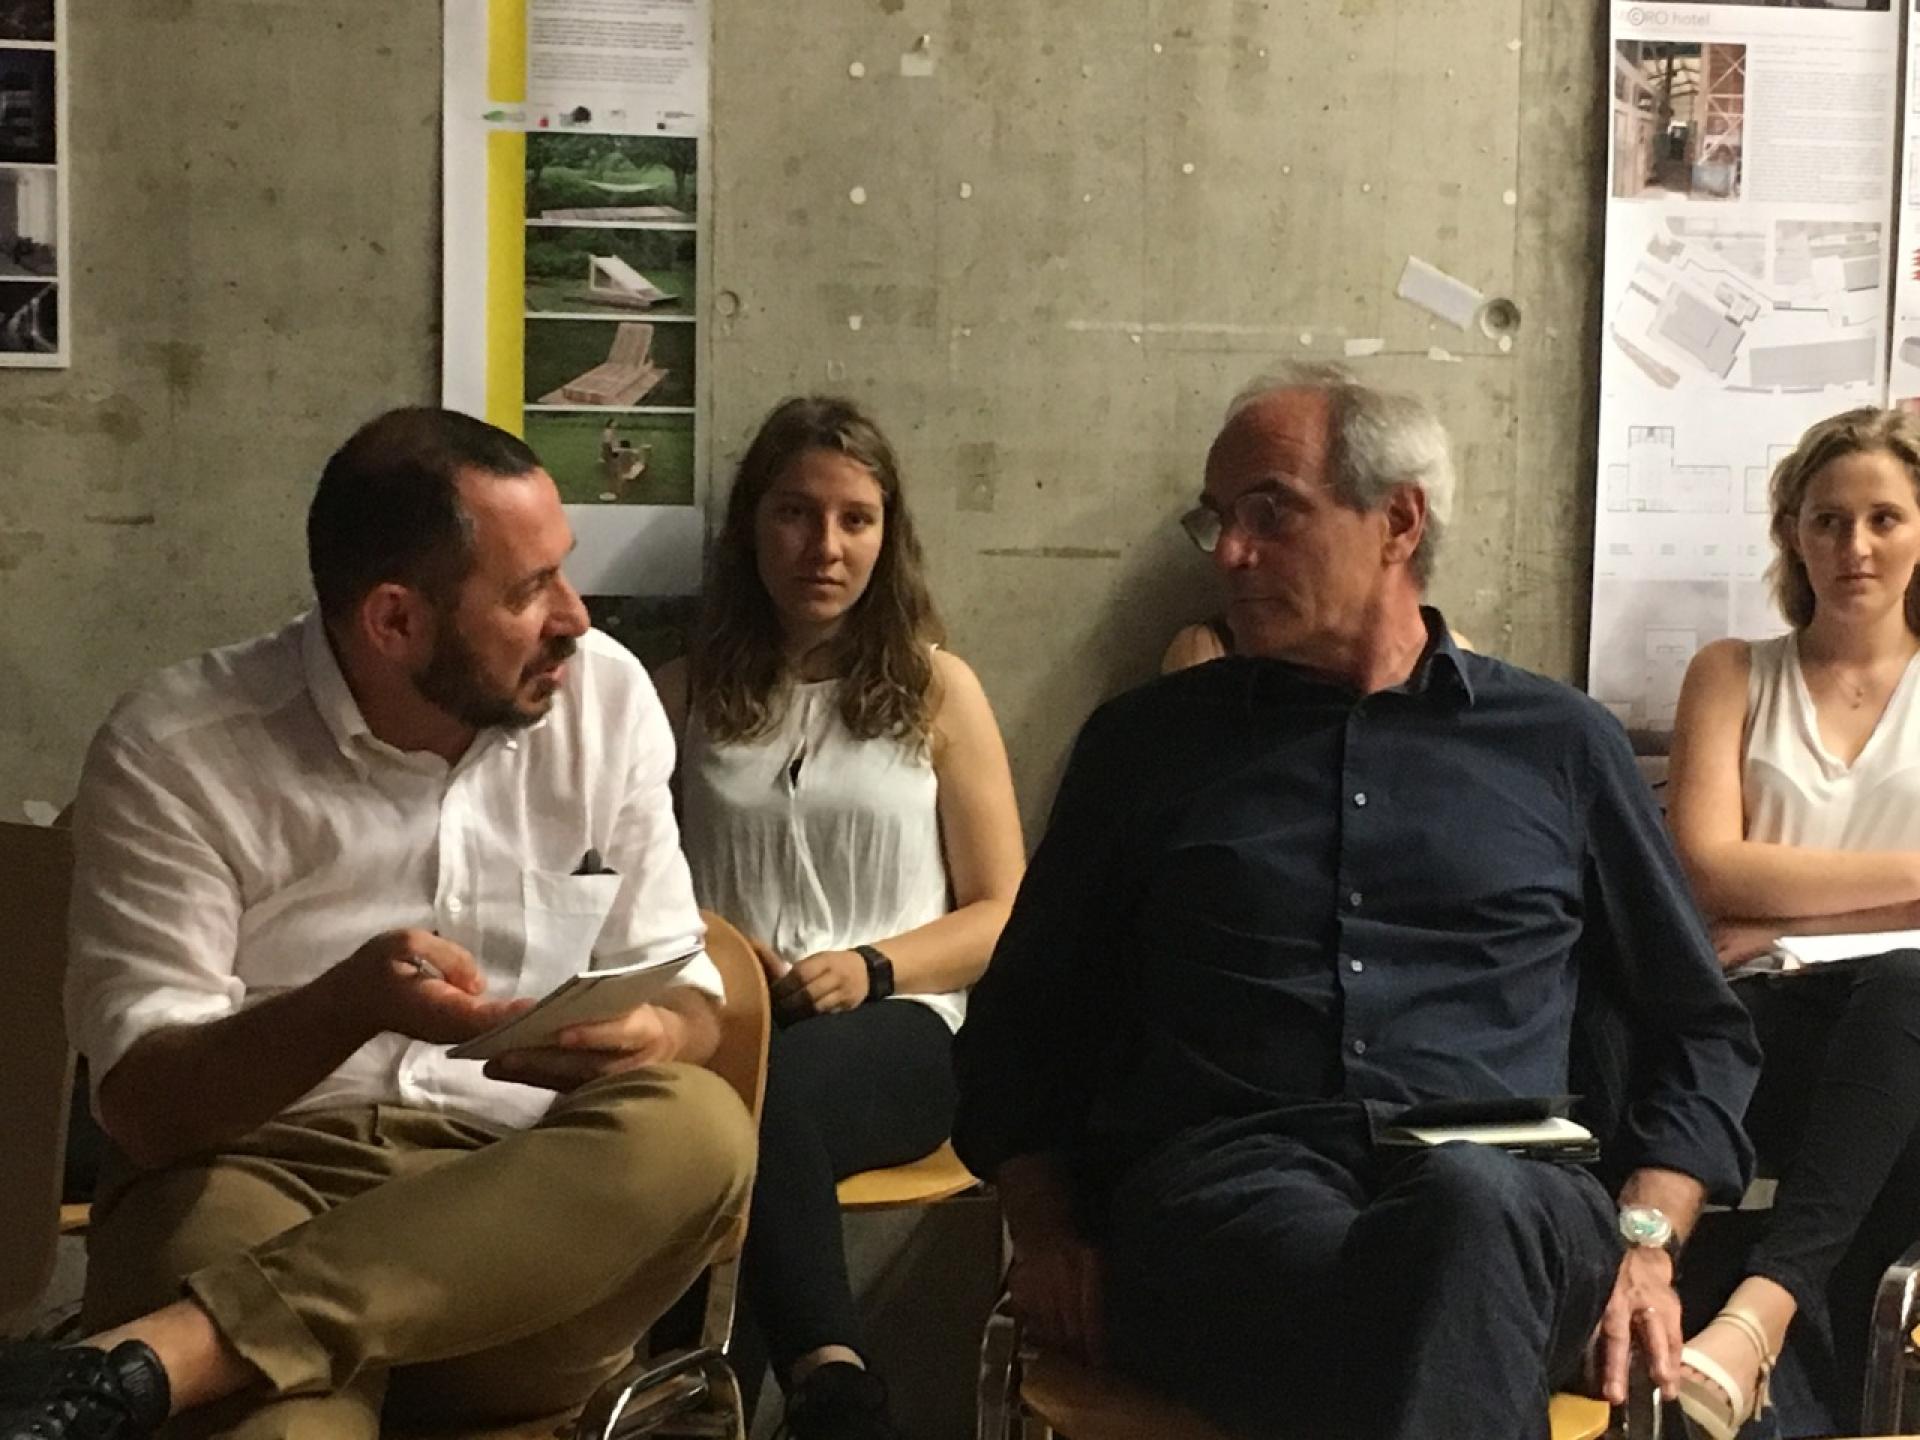 Alessio Rosati in a discussion with Frédéric Druot at the workshop with students at the Faculty of Architecture in Ljubljana.